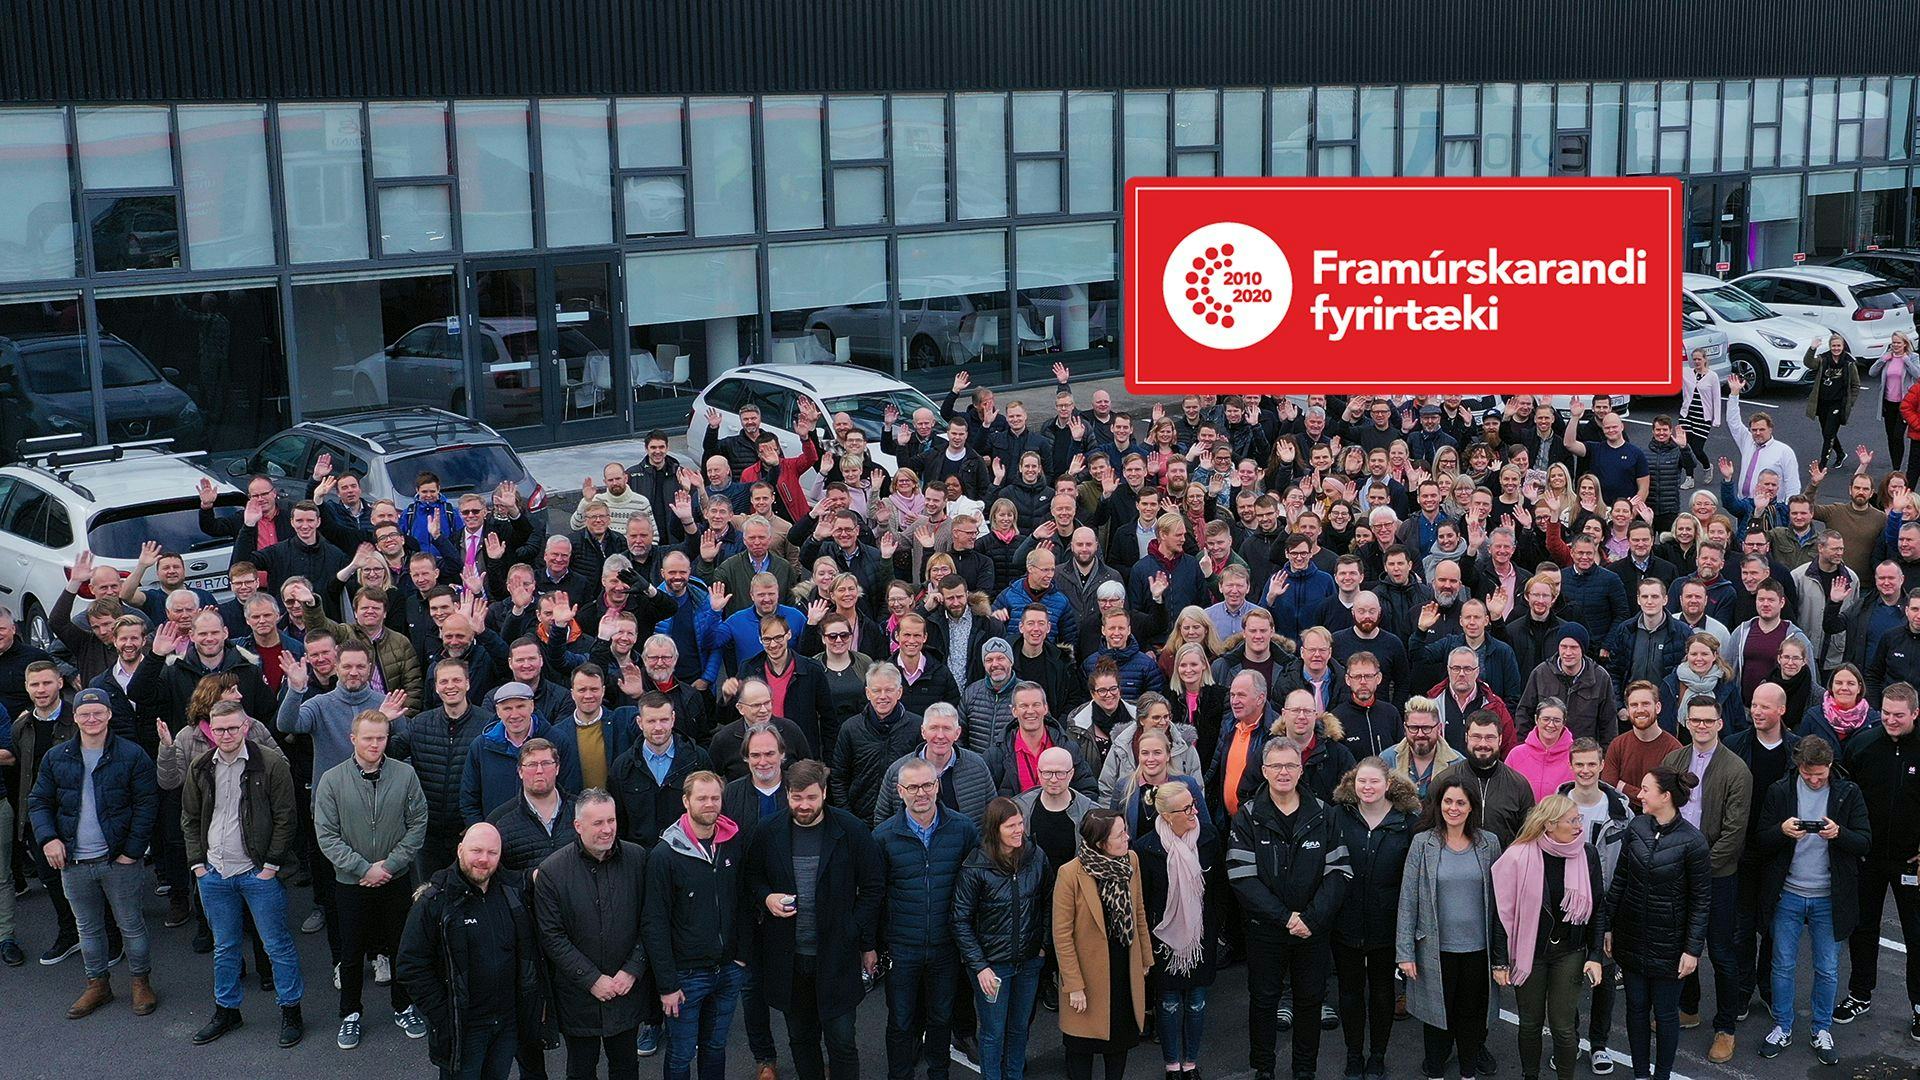 A group of people gathered in front of a modern building with some Icelandic text "Framurskarandi fyrirtæki"